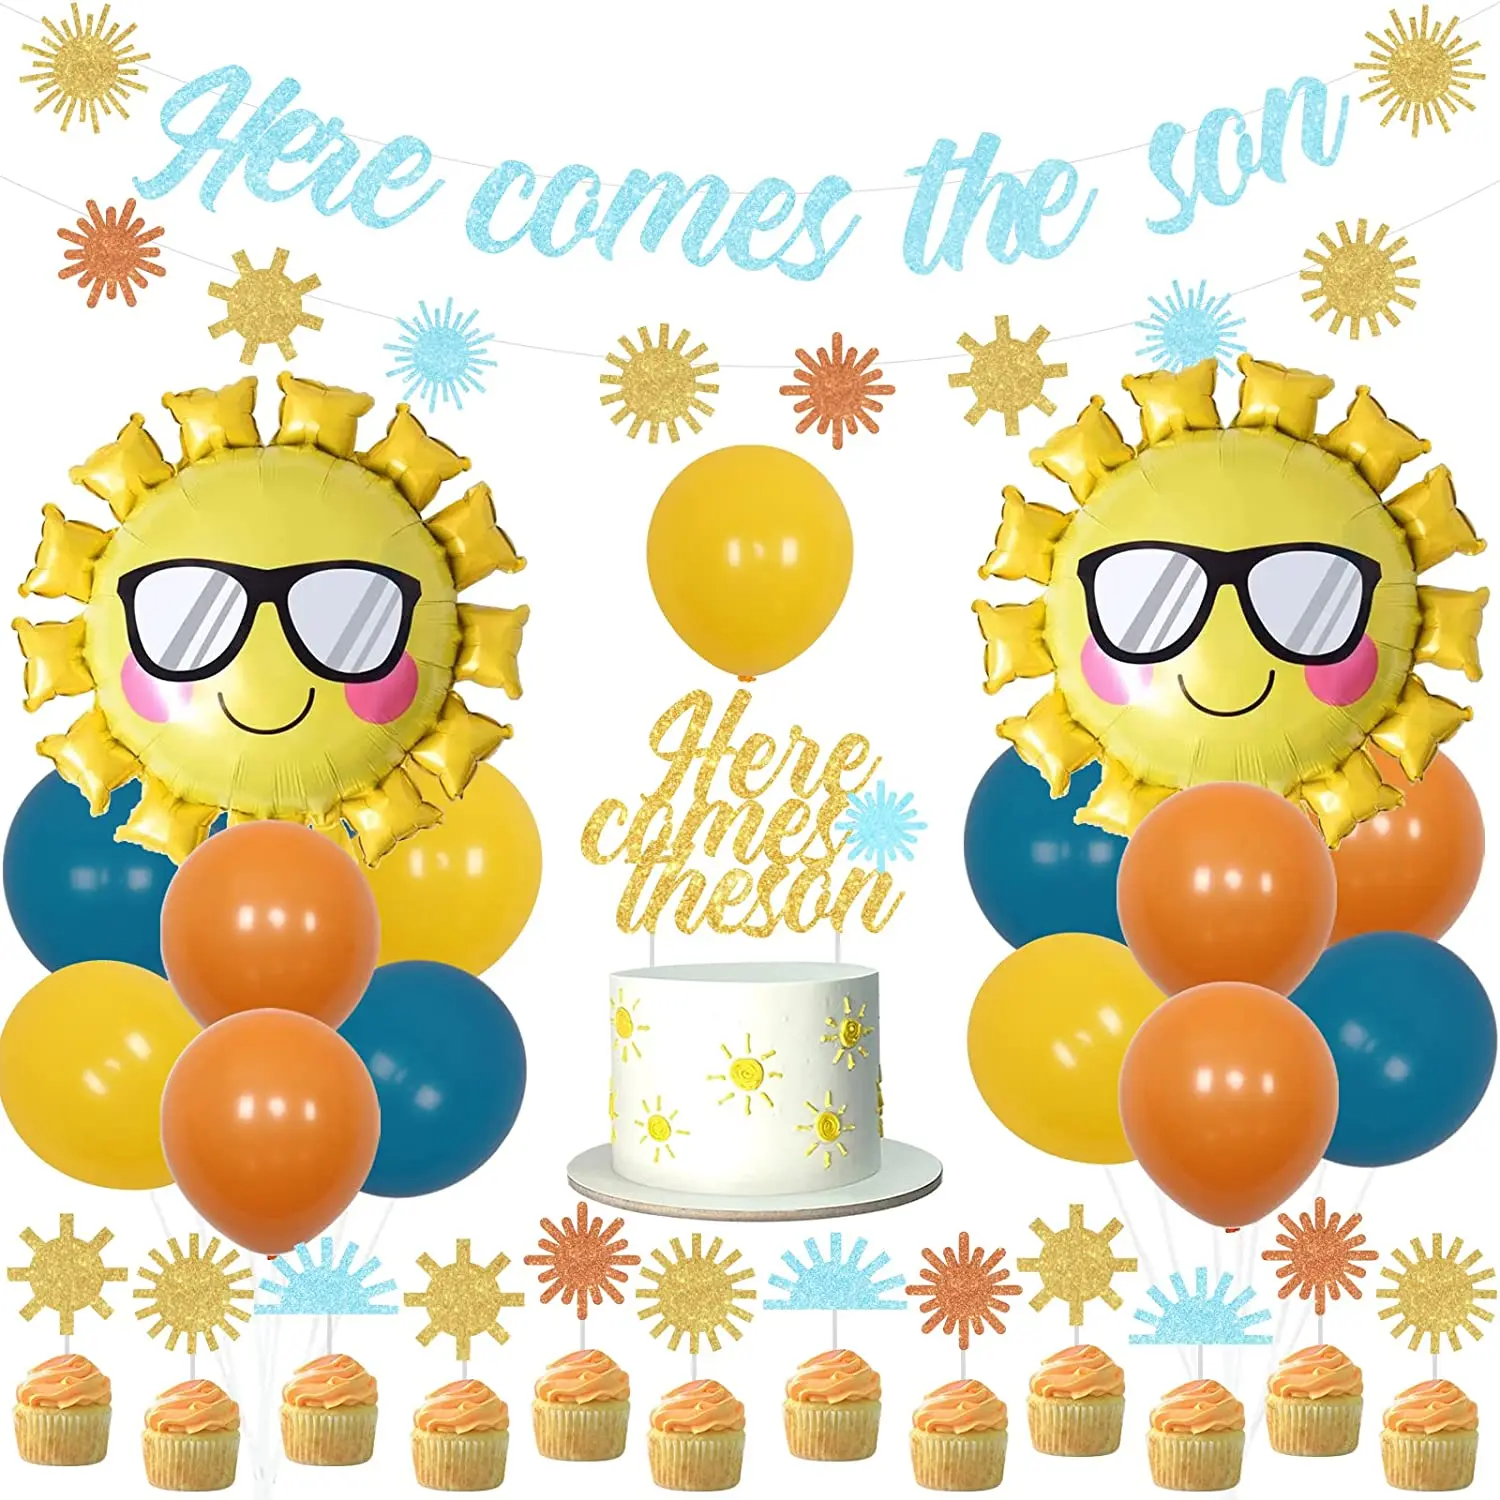 

Sun Theme Baby Shower Decorations Here Comes The Son Banner Cake Toppers Sun Balloons for Boy Boho Retro Sunshine Party Decor